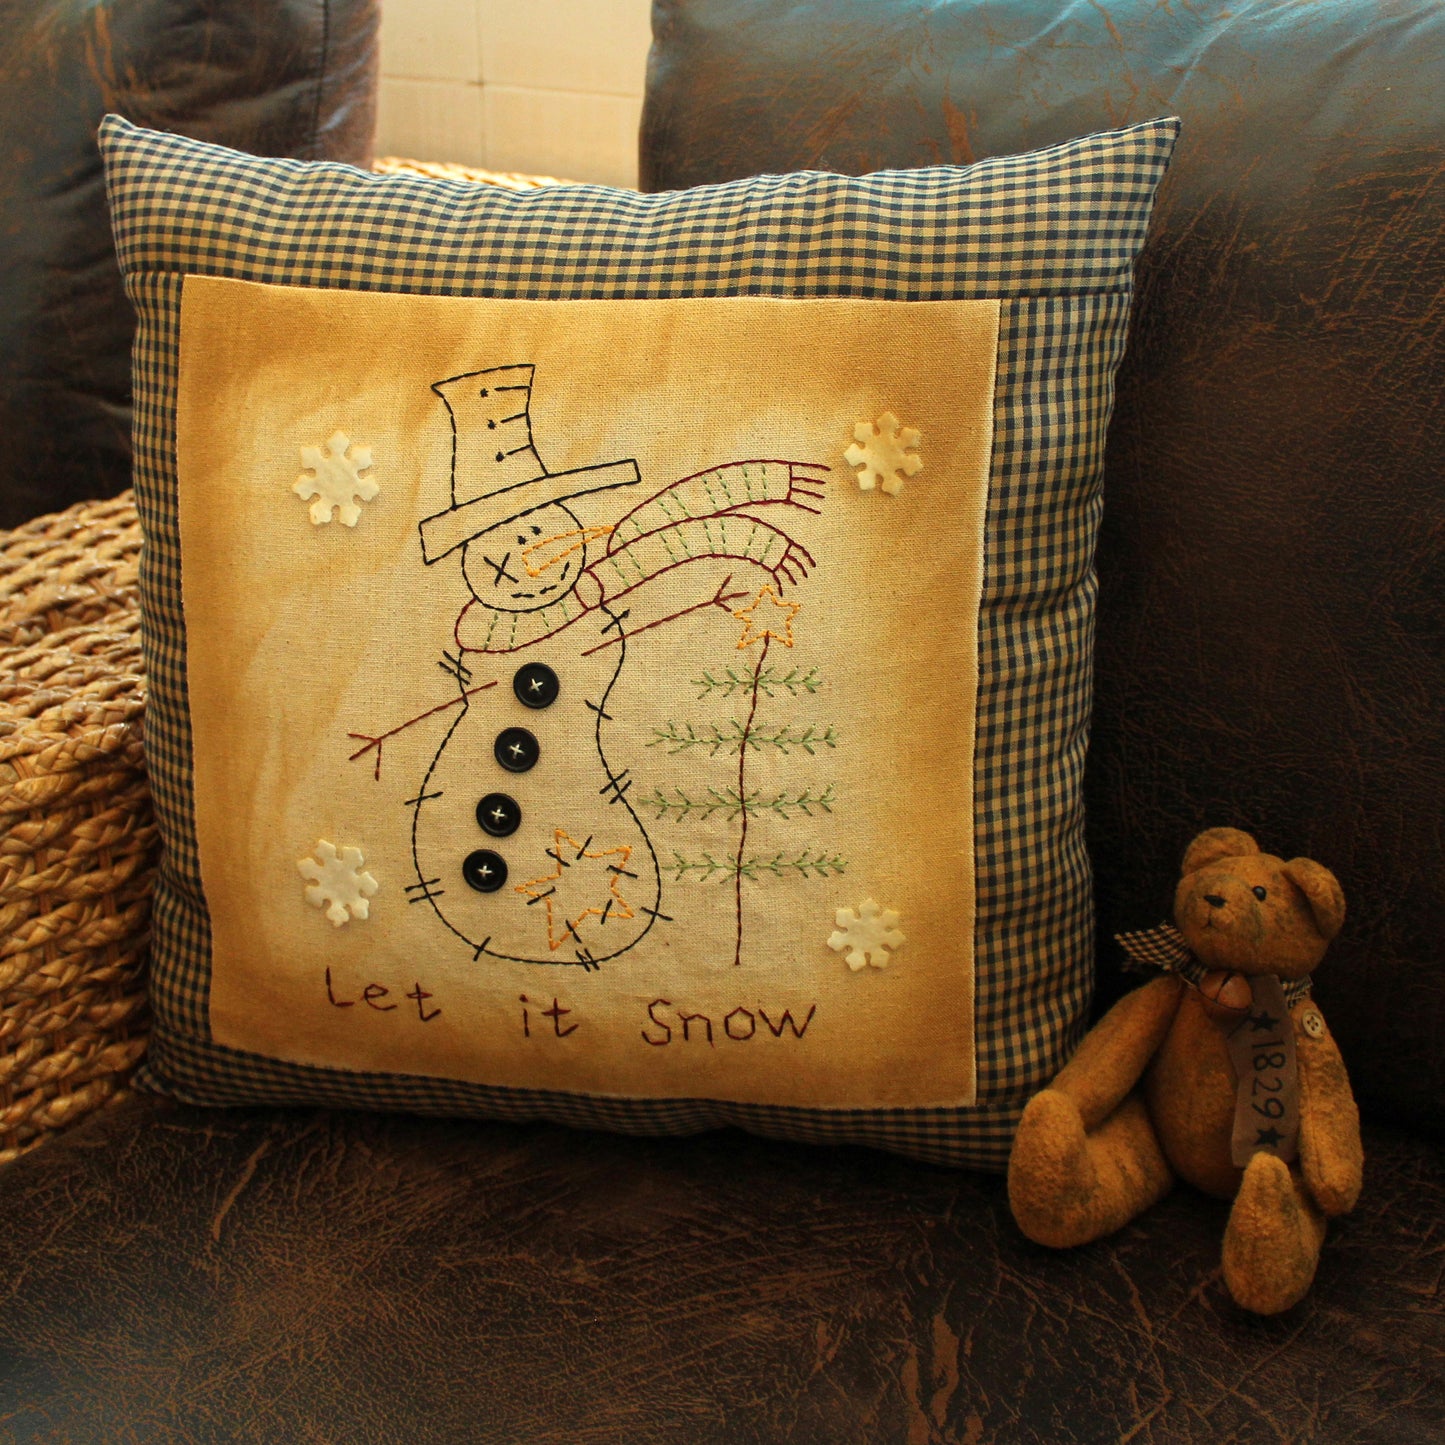 CVHOMEDECO. Primitives Let It Snow Embroidered Throw Pillow with Snowman Snowflake Tree Farmhouse Accent. 16 x 16 Inch